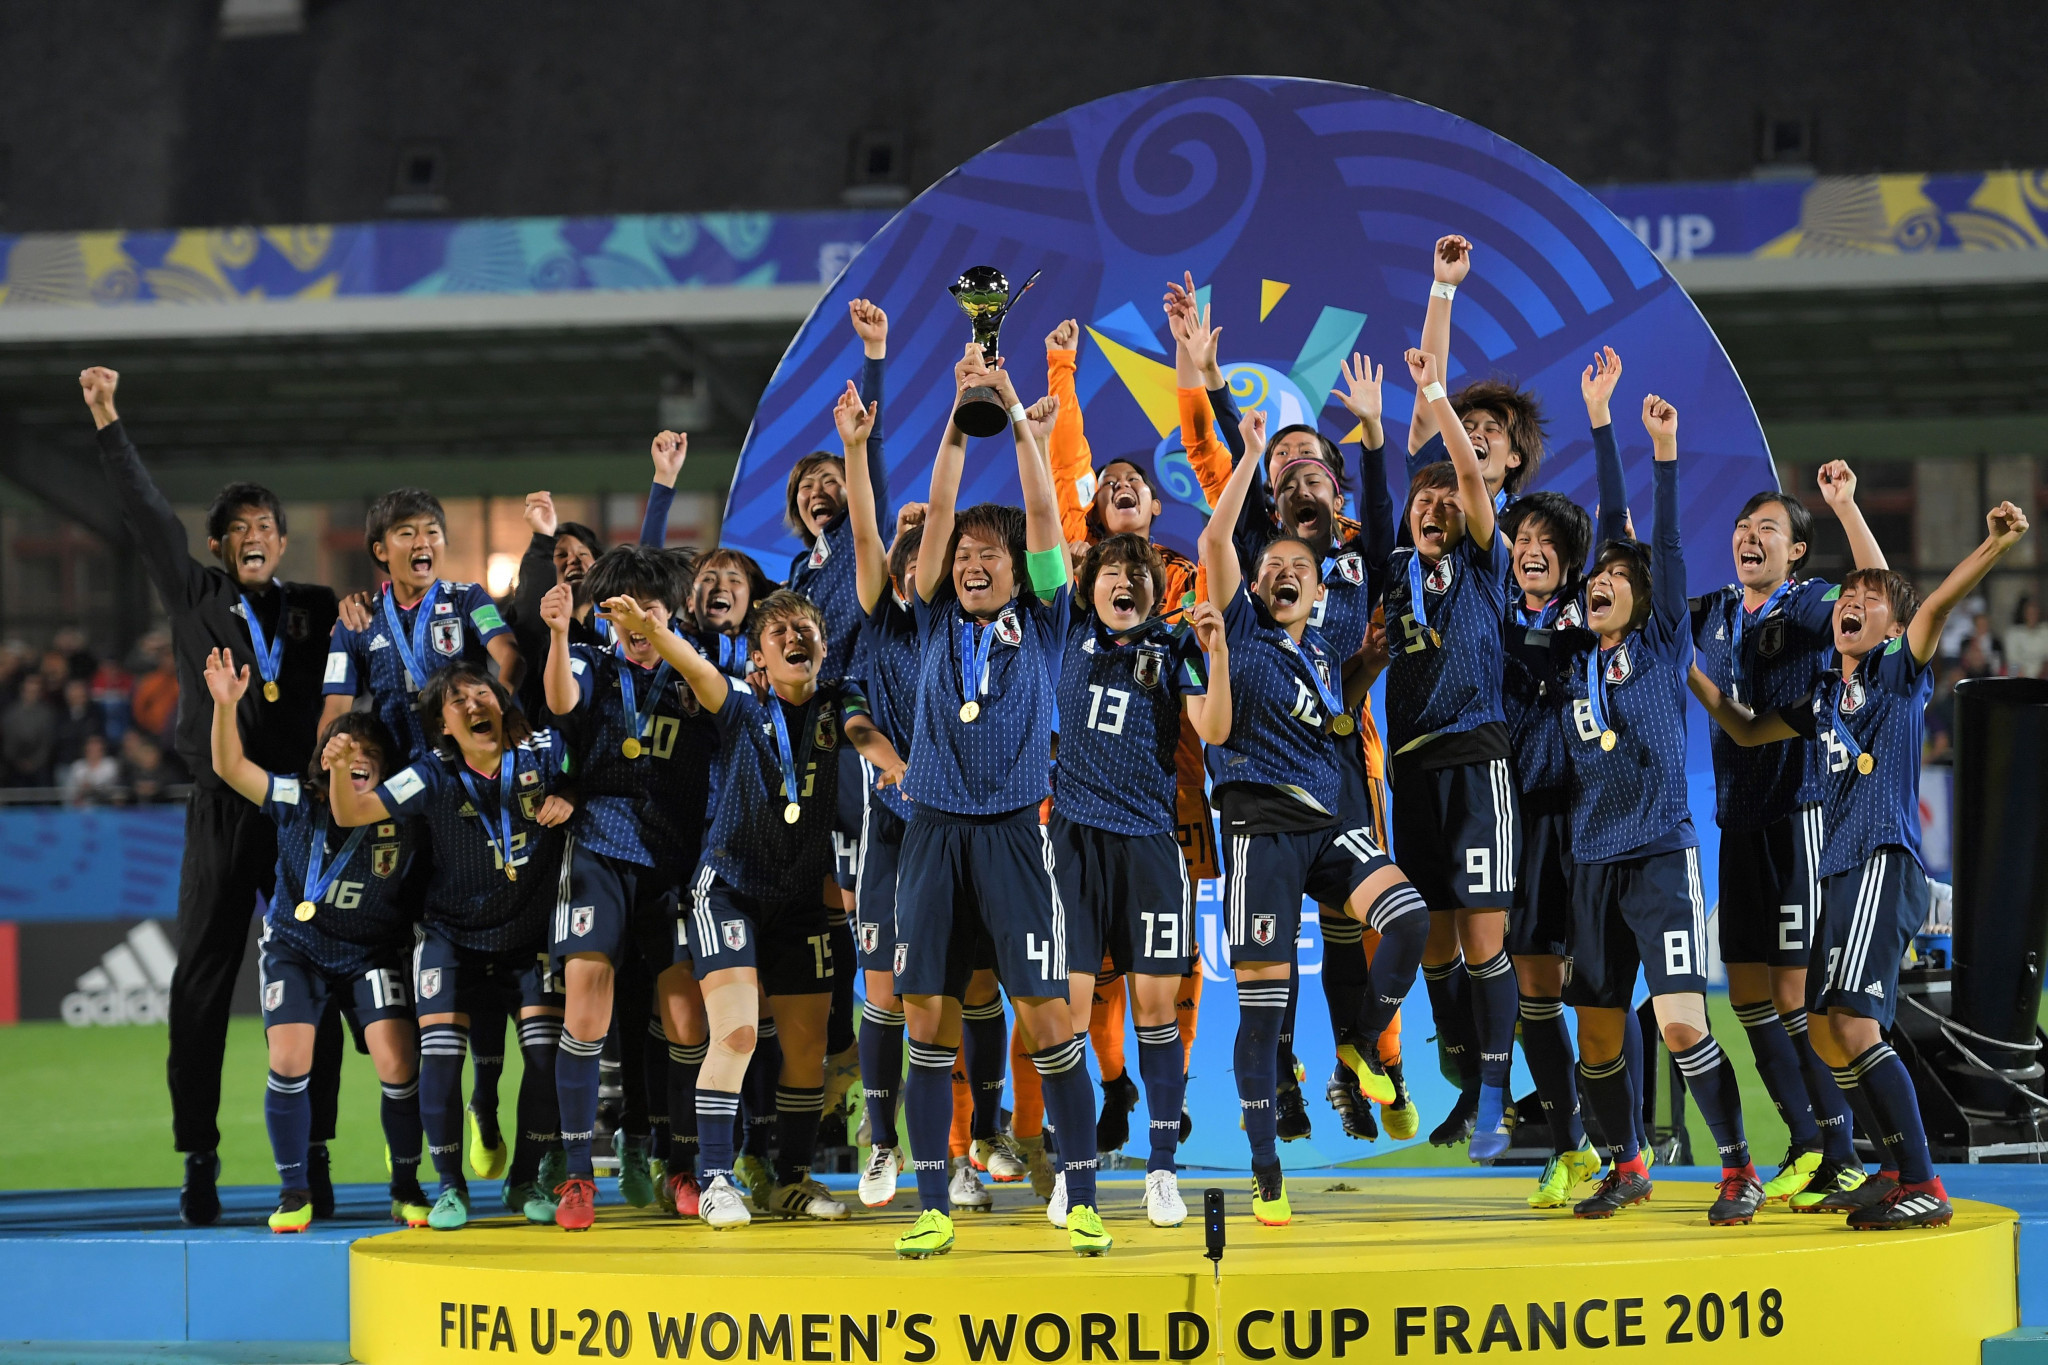 Costa Rica and Panama to host FIFA Under-20 Womens World Cup in 2020